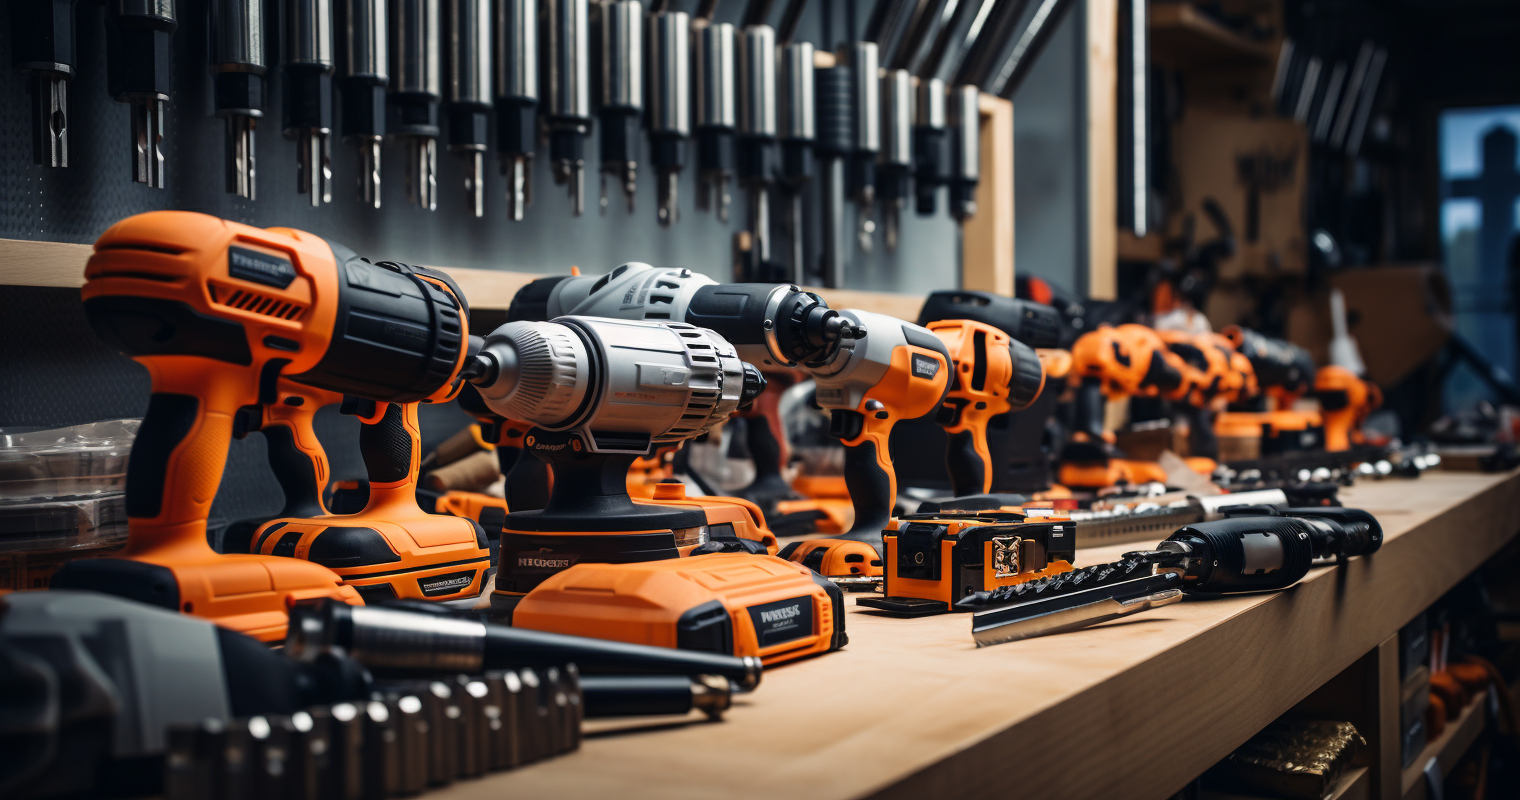 Array Of American-Made Power Tools In A Workshop Setting